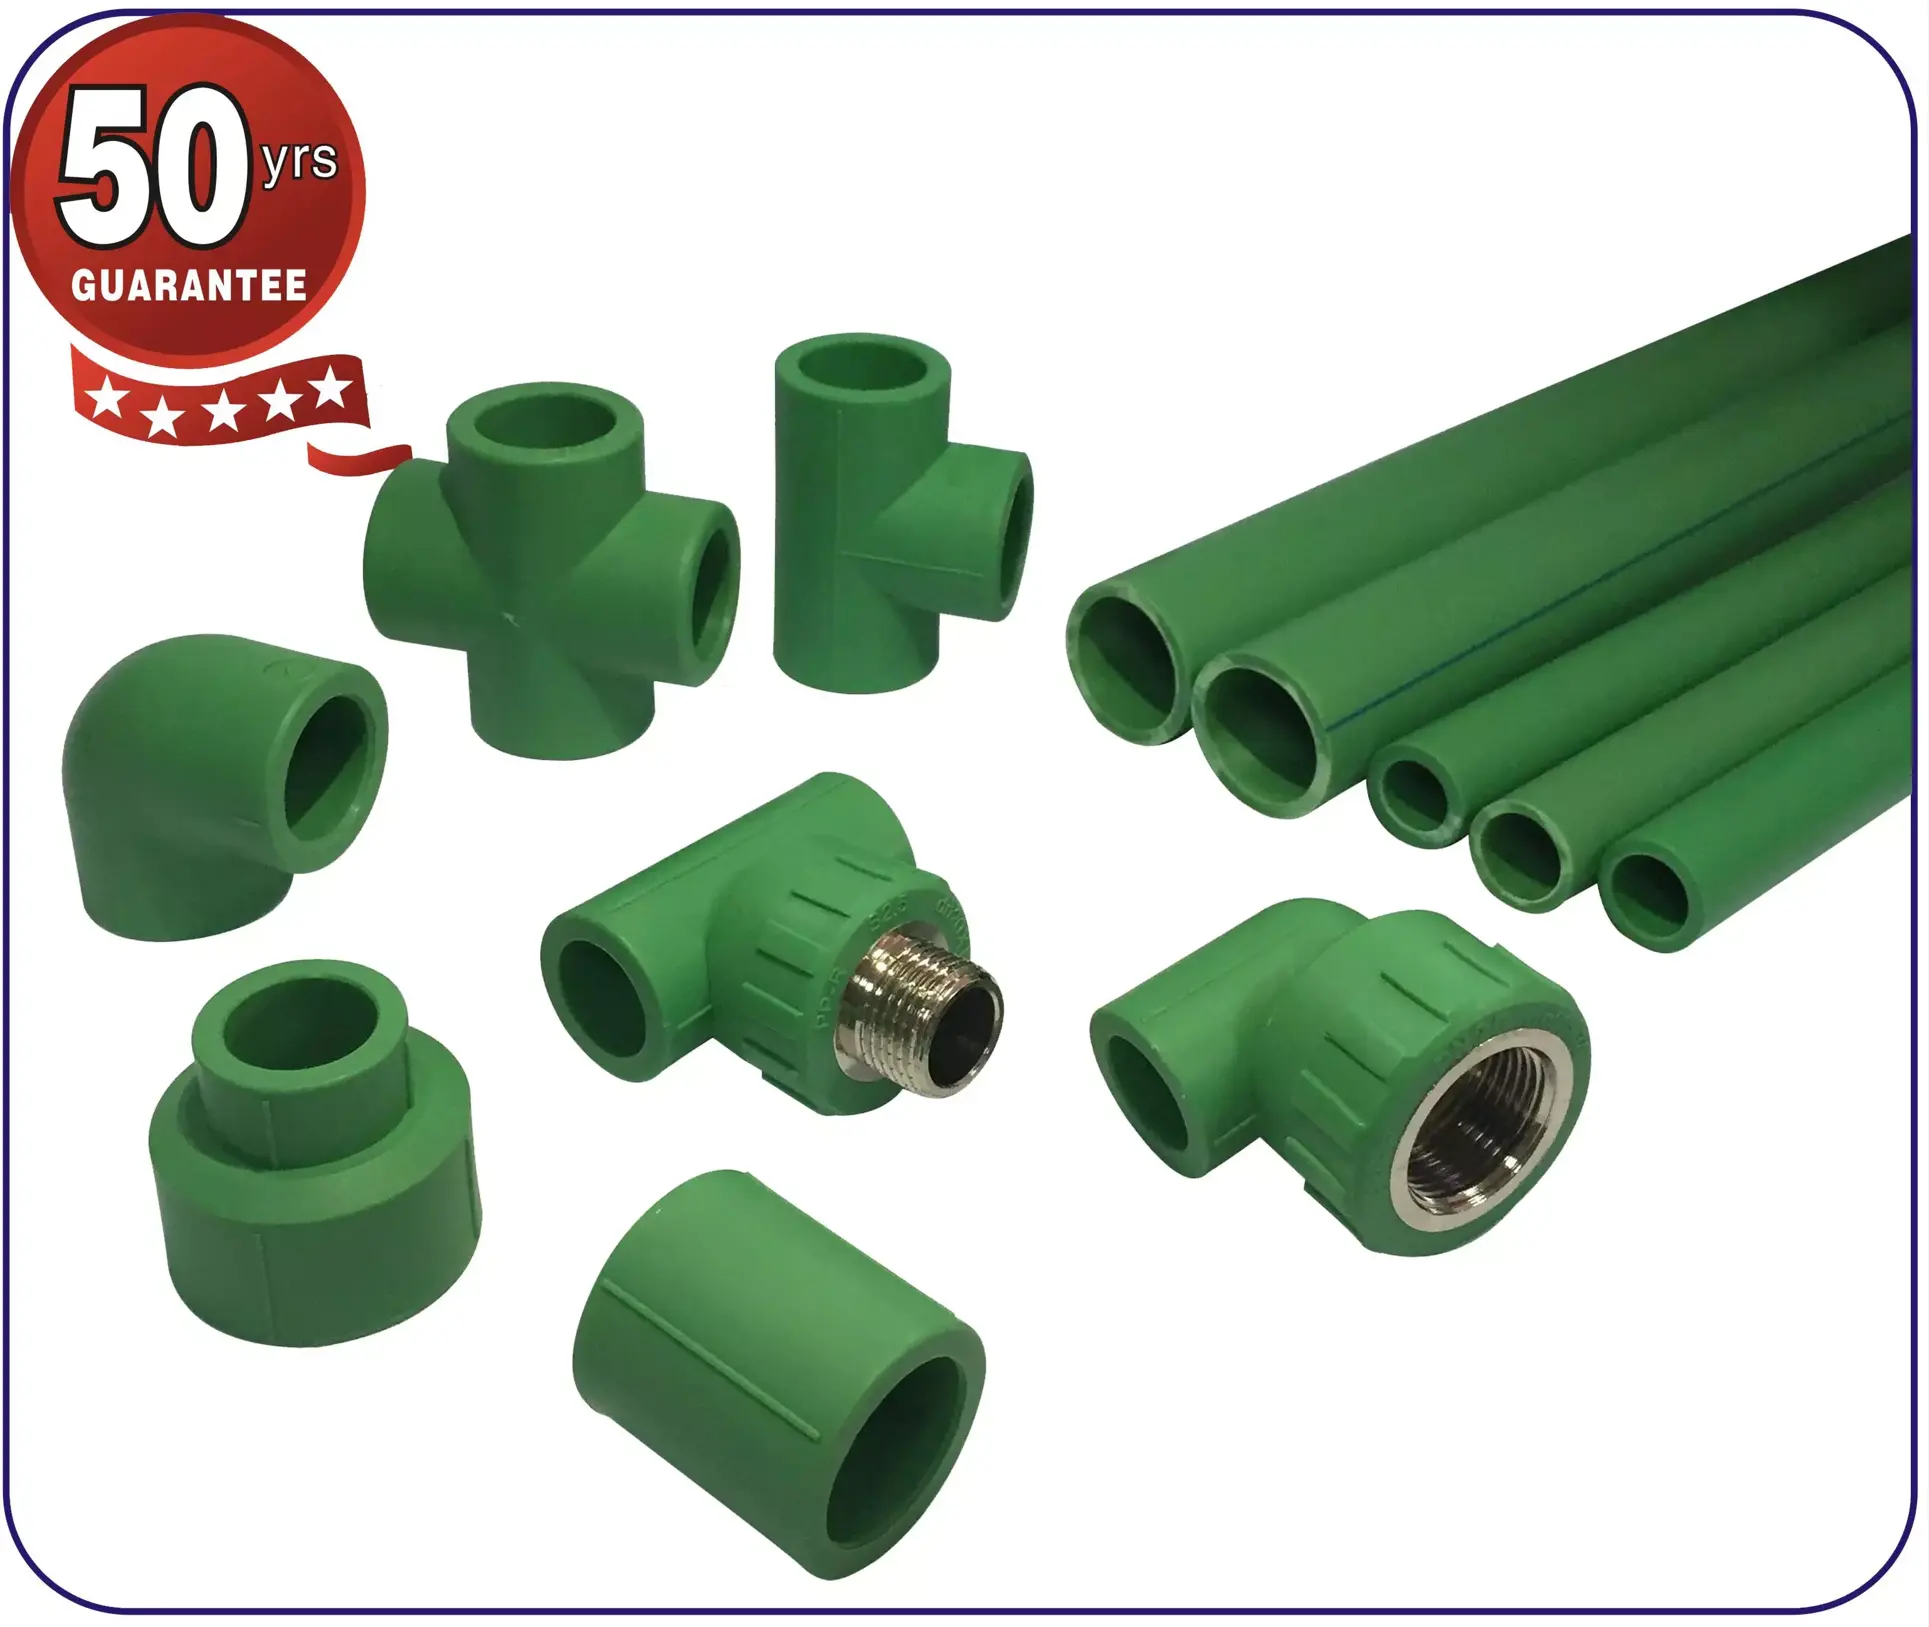 CE Certification PPR Pipes Fittings Plastic Tube Quick Plug Fittings for Hot and Cold Water Transportation